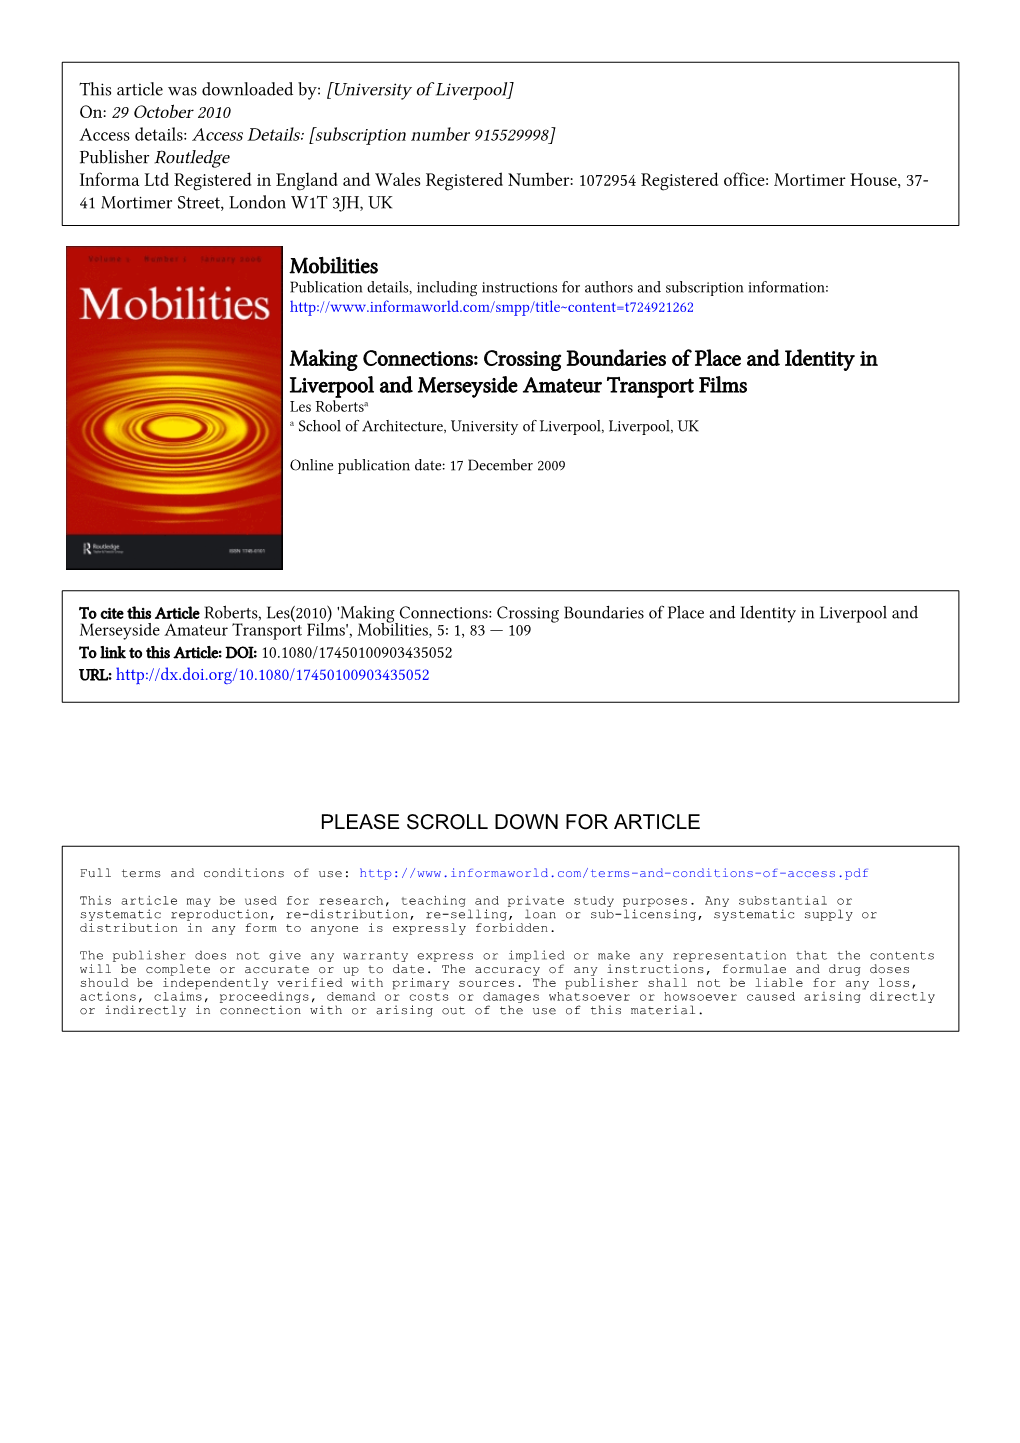 Mobilities Making Connections